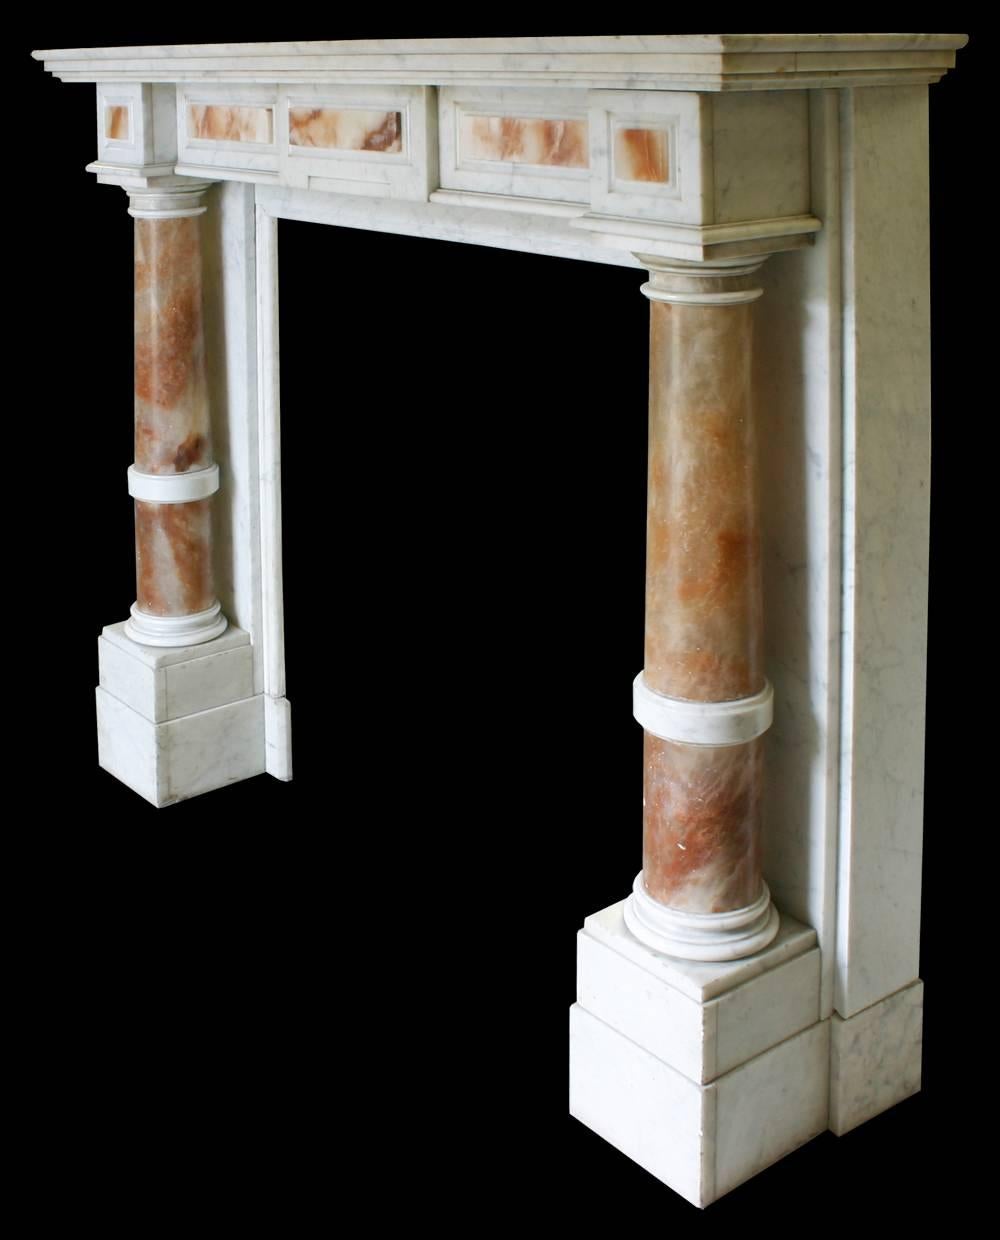 Mid-19th century continental Carrara marble fire surround, the substantial alabaster pillars support the box frieze which is decorated with alabaster mounts and is in turn surmounted by the heavily moulded shelf, circa 1870.
Images prior to